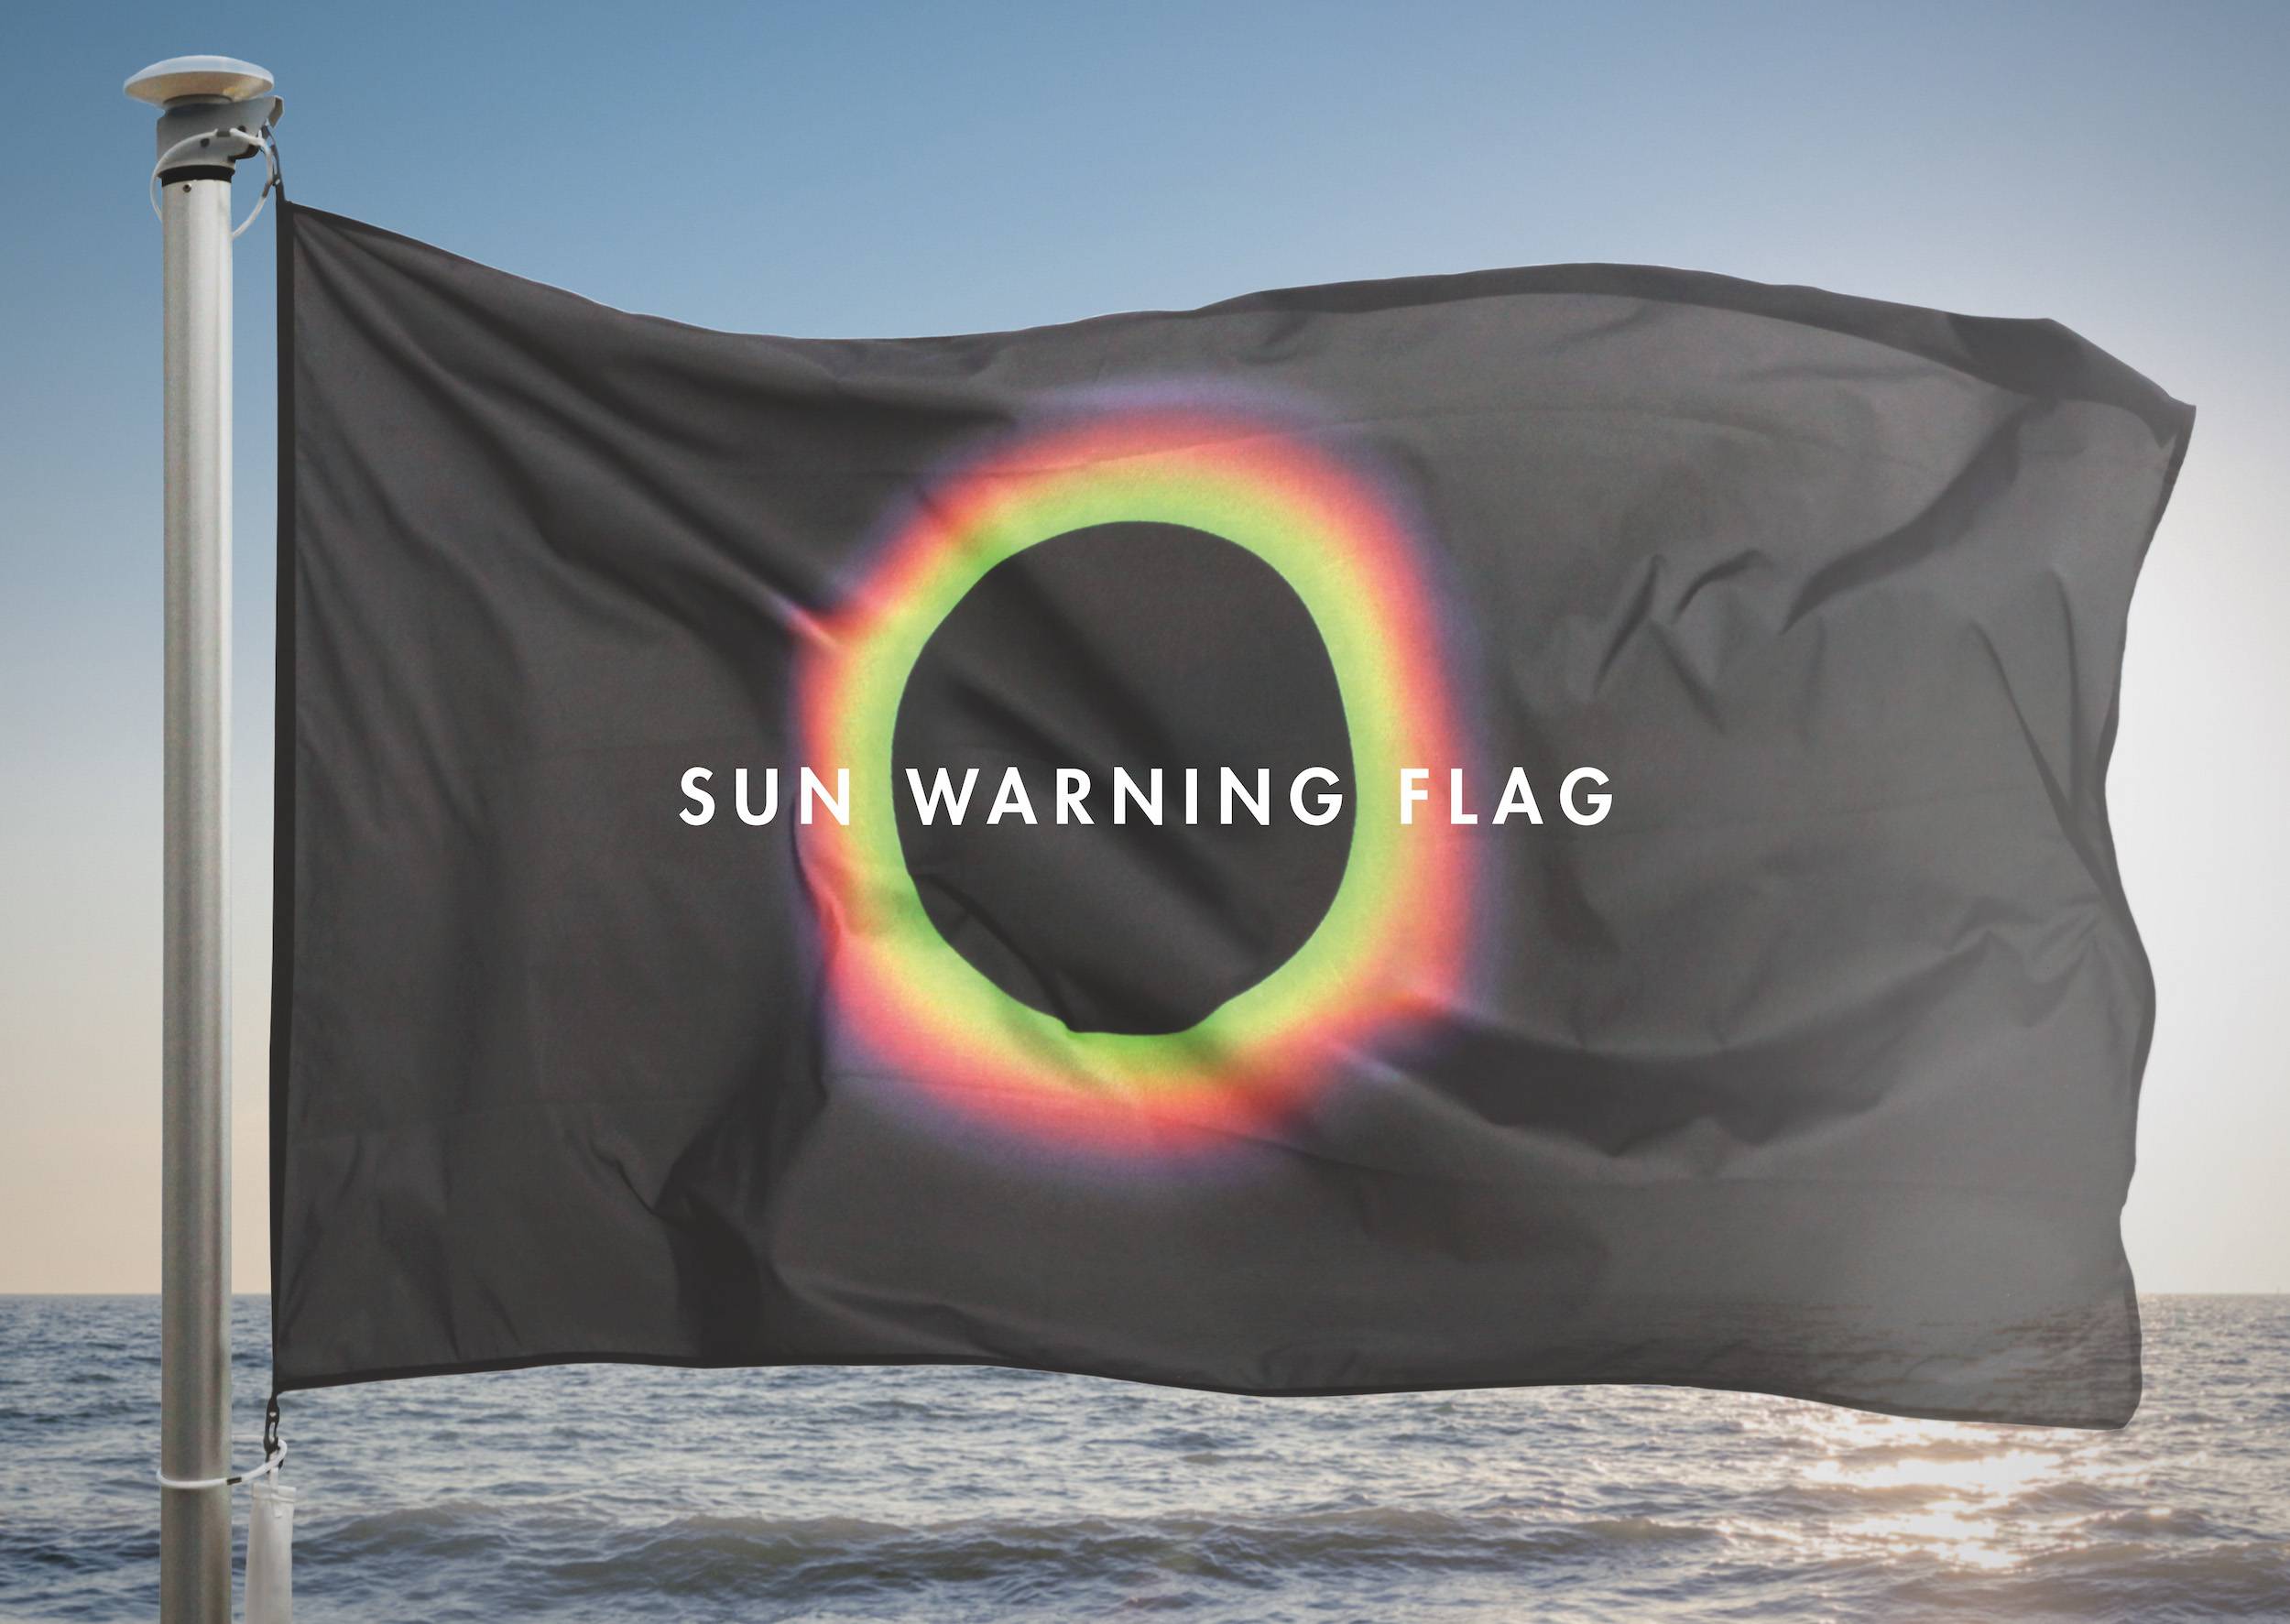 A large black flag with a circle of light that says "Sun Warning Flag", on display at a beach